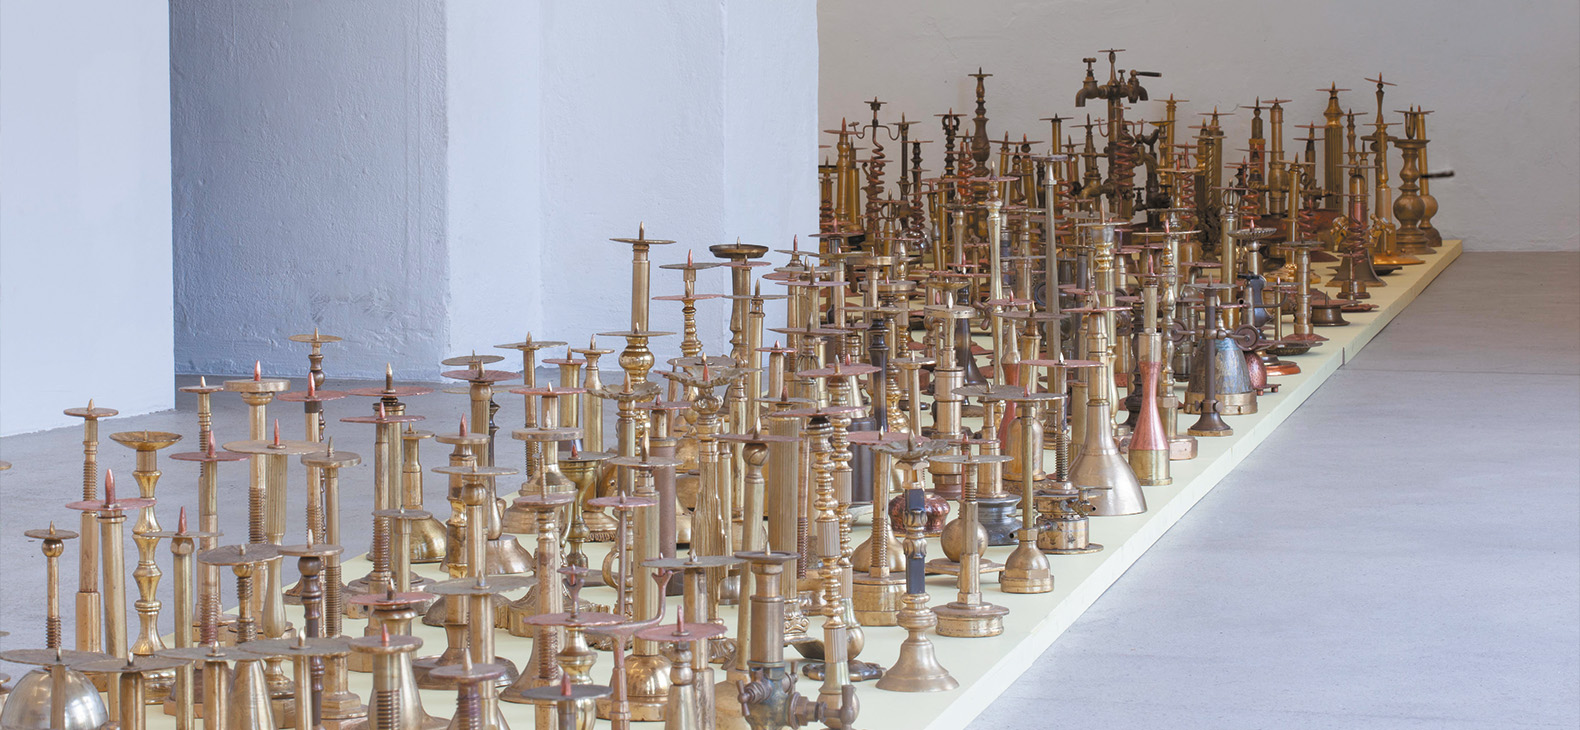 Rebekka Bauer: As found as objects, exhibition view Kunstraum Ortloff Leipzig, 2019; photo: Rebekka Bauer; photograph of an installation of 550 shiny metal objects (mostly candlesticks) on a limited track on the floor of a white room.